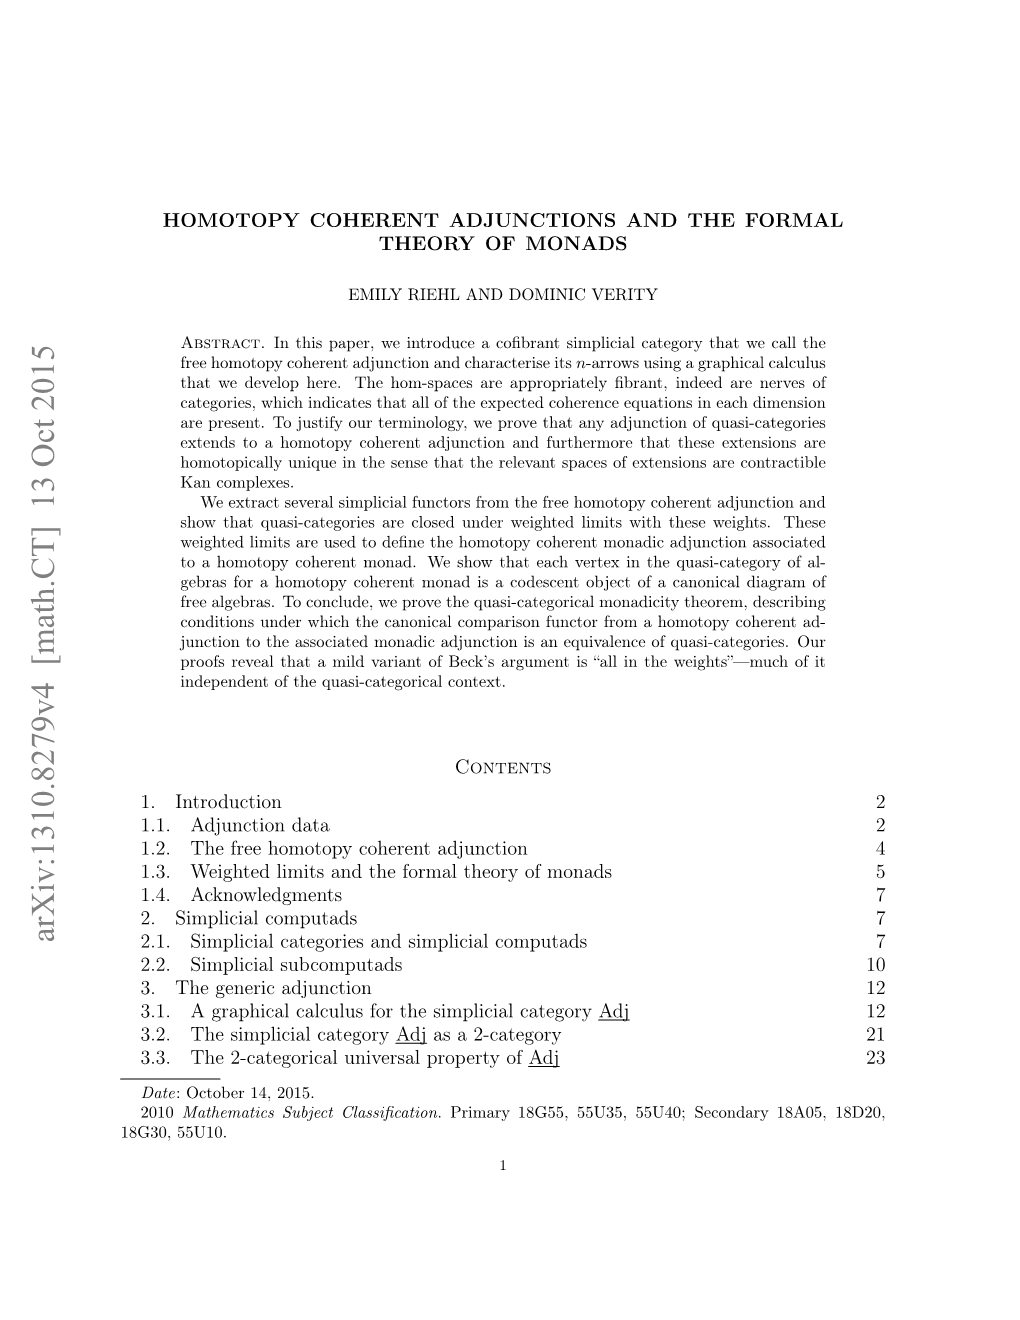 Homotopy Coherent Adjunctions and the Formal Theory of Monads